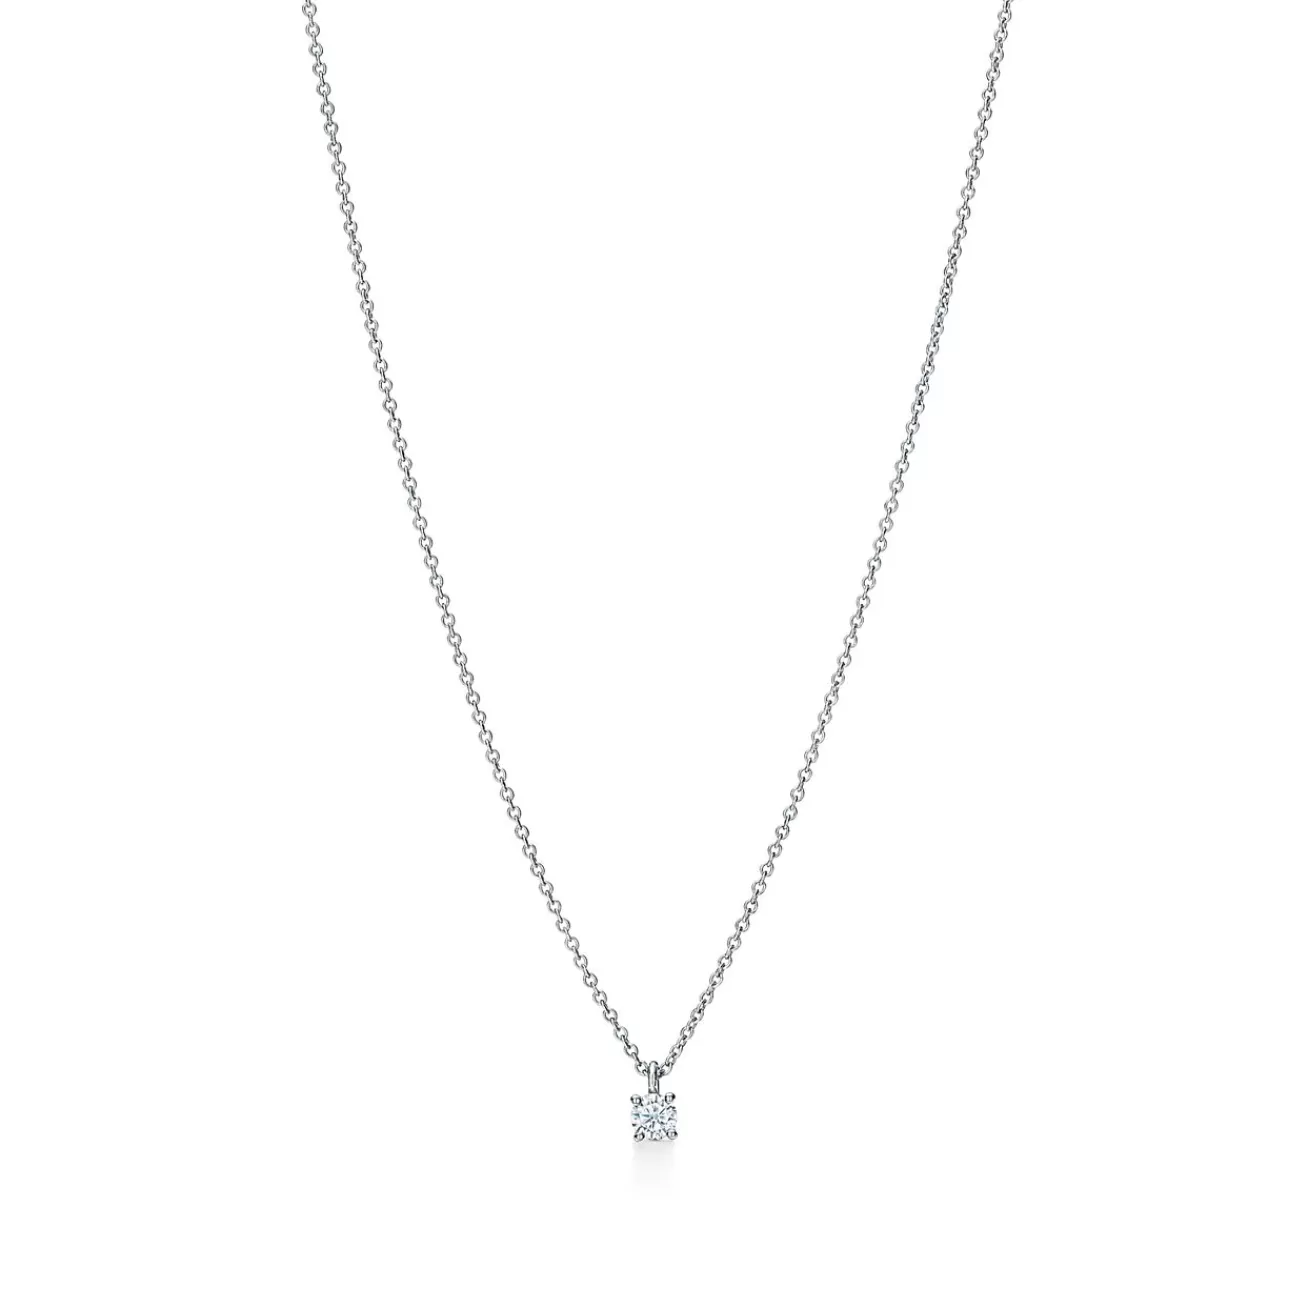 Tiffany & Co. Tiffany Solitaire Diamond Pendant in Platinum | ^ Necklaces & Pendants | Gifts for Her